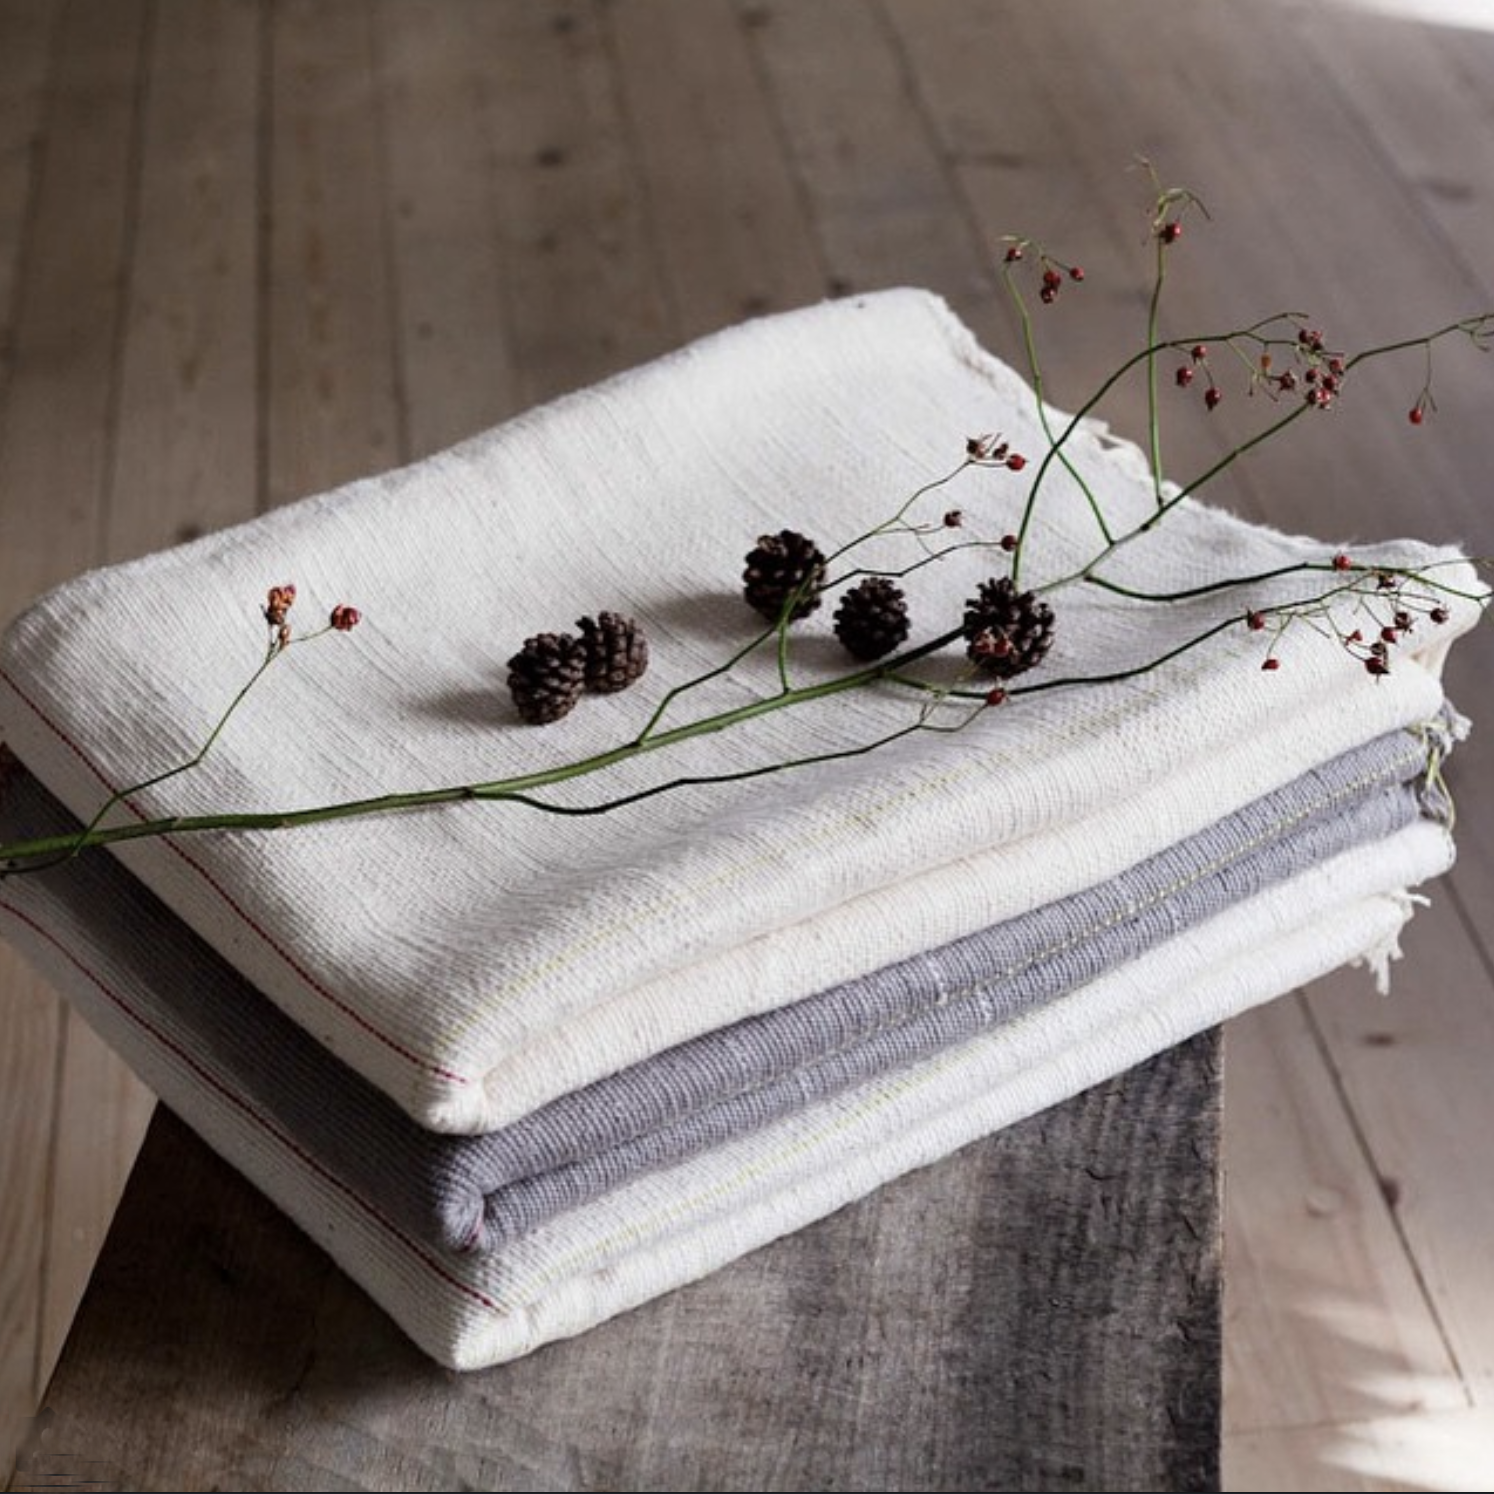 100% Cotton Handwoven Yoga Blanket Impeccably Designed – Priti Collection.  Tools for an enlightened life.